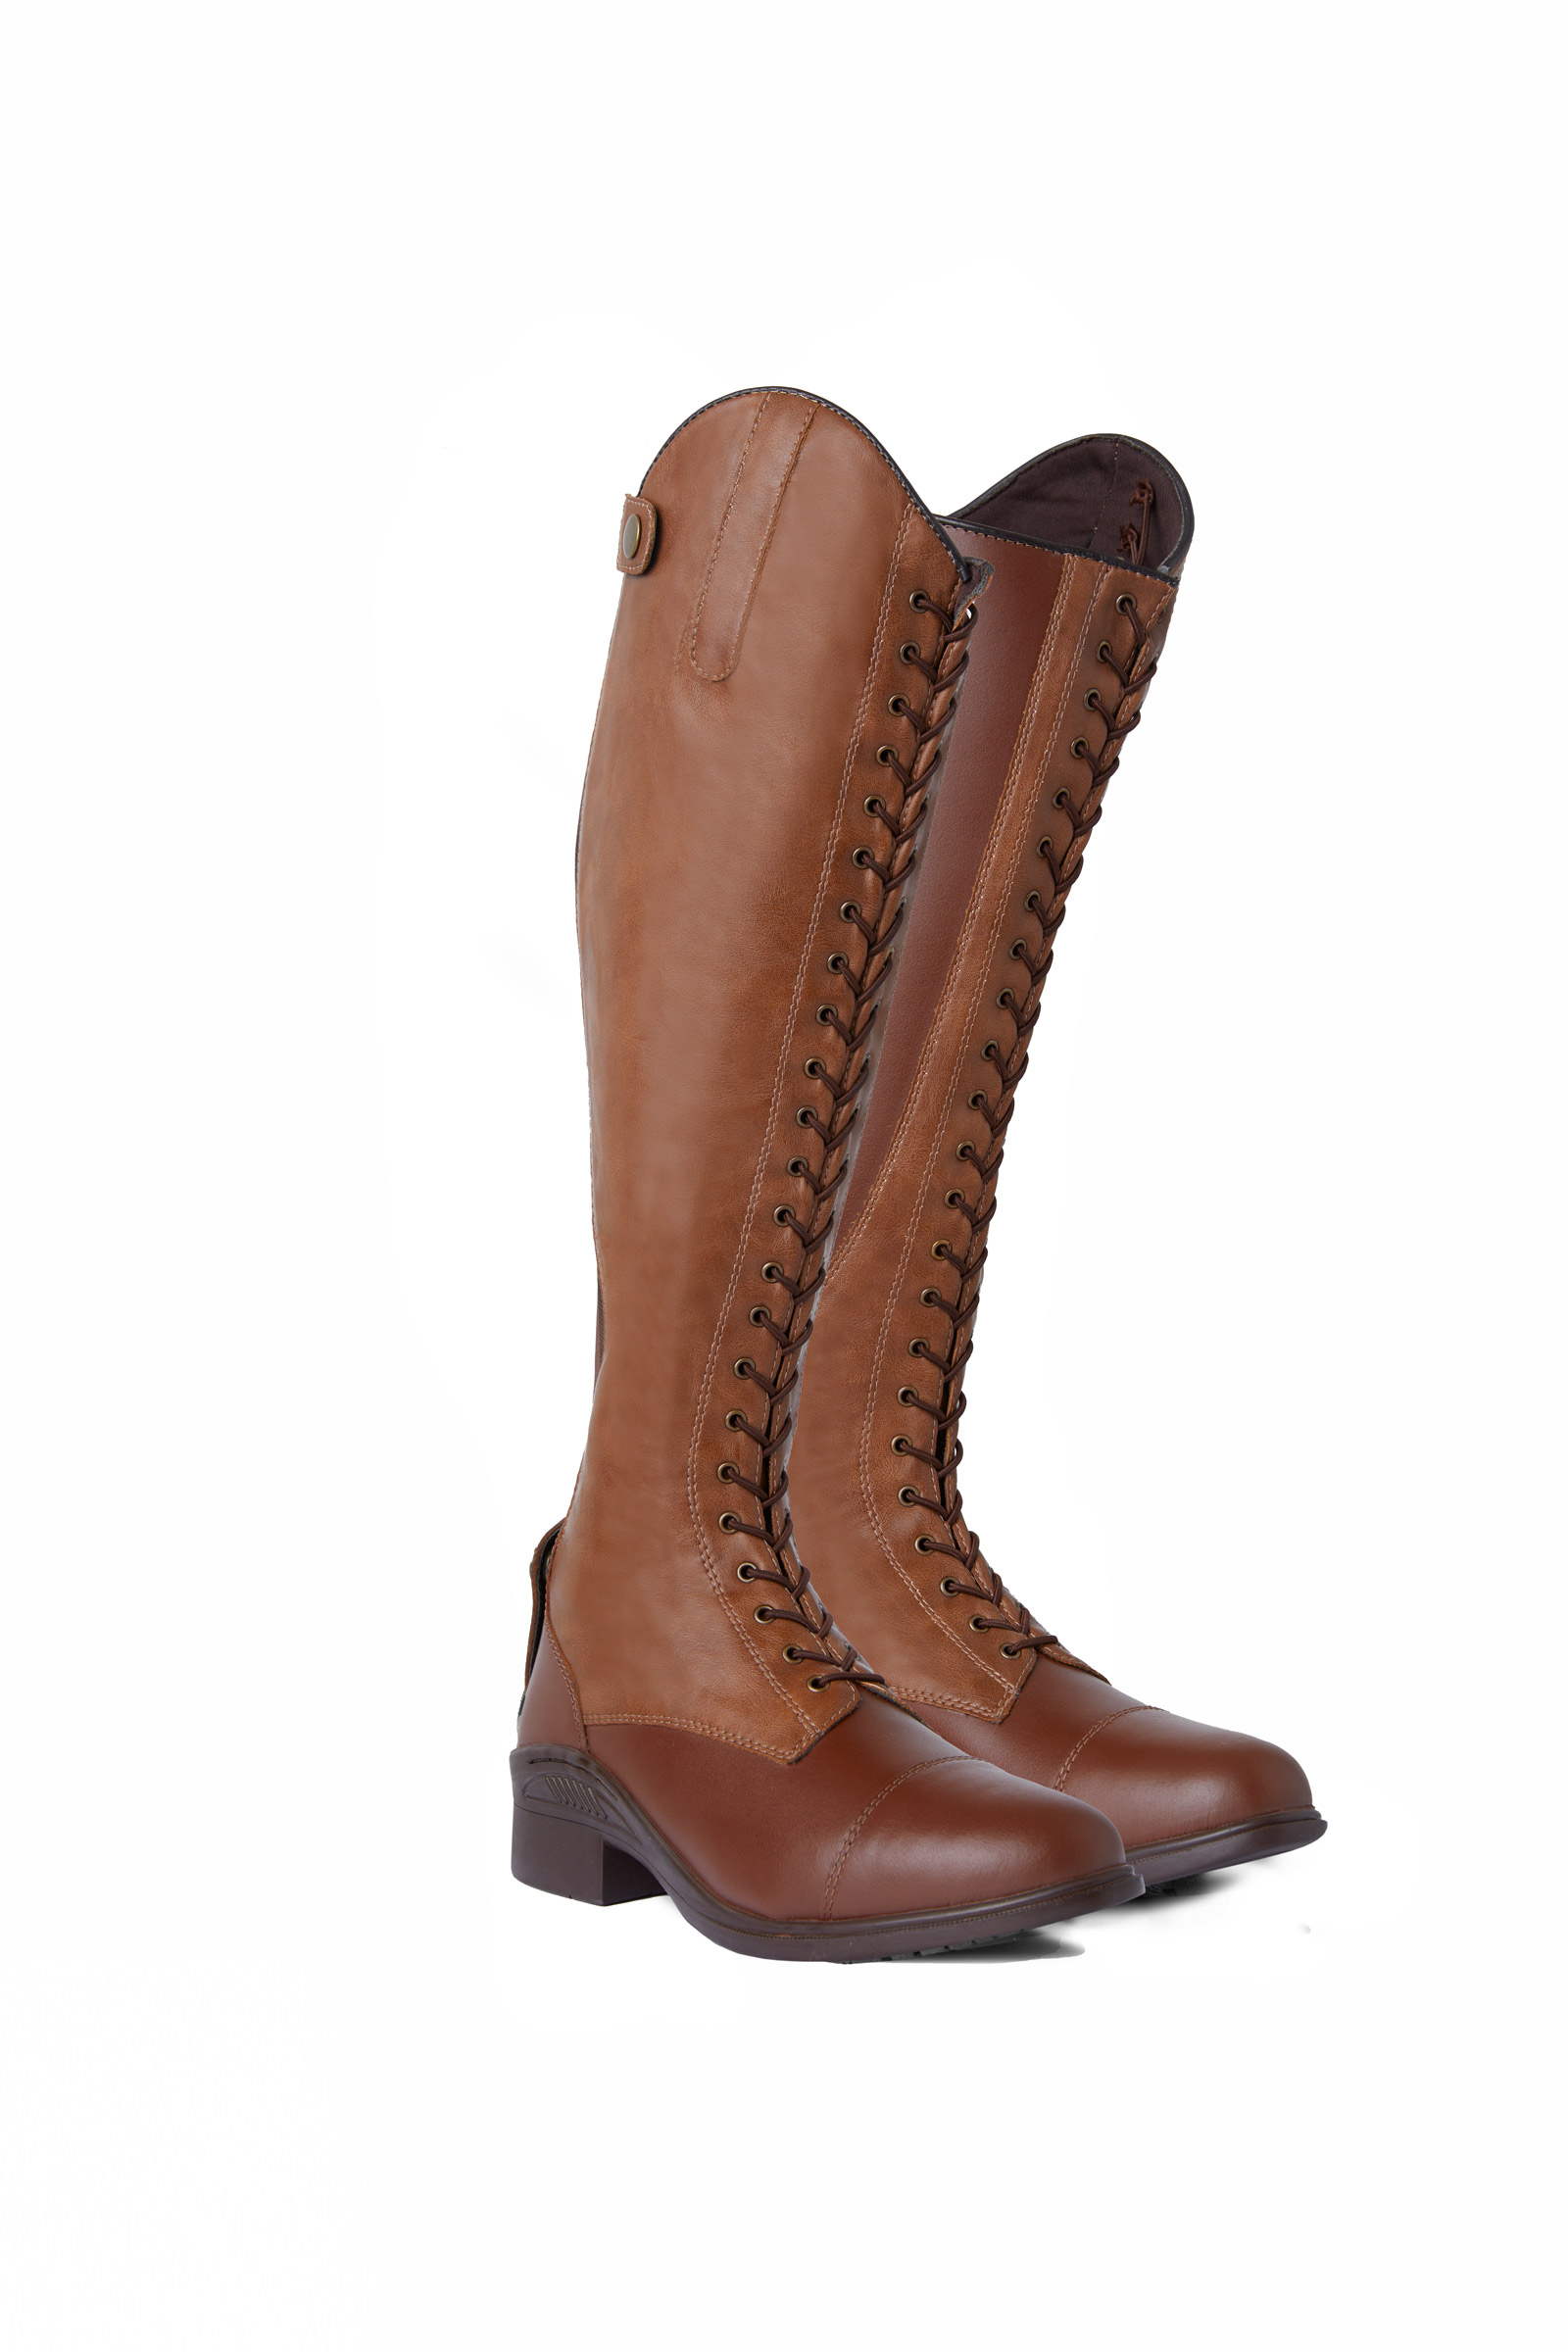 WOMEN'S ROVER DRESSAGE TALL BOOT - Equine Essentials Tack & Laundry Services